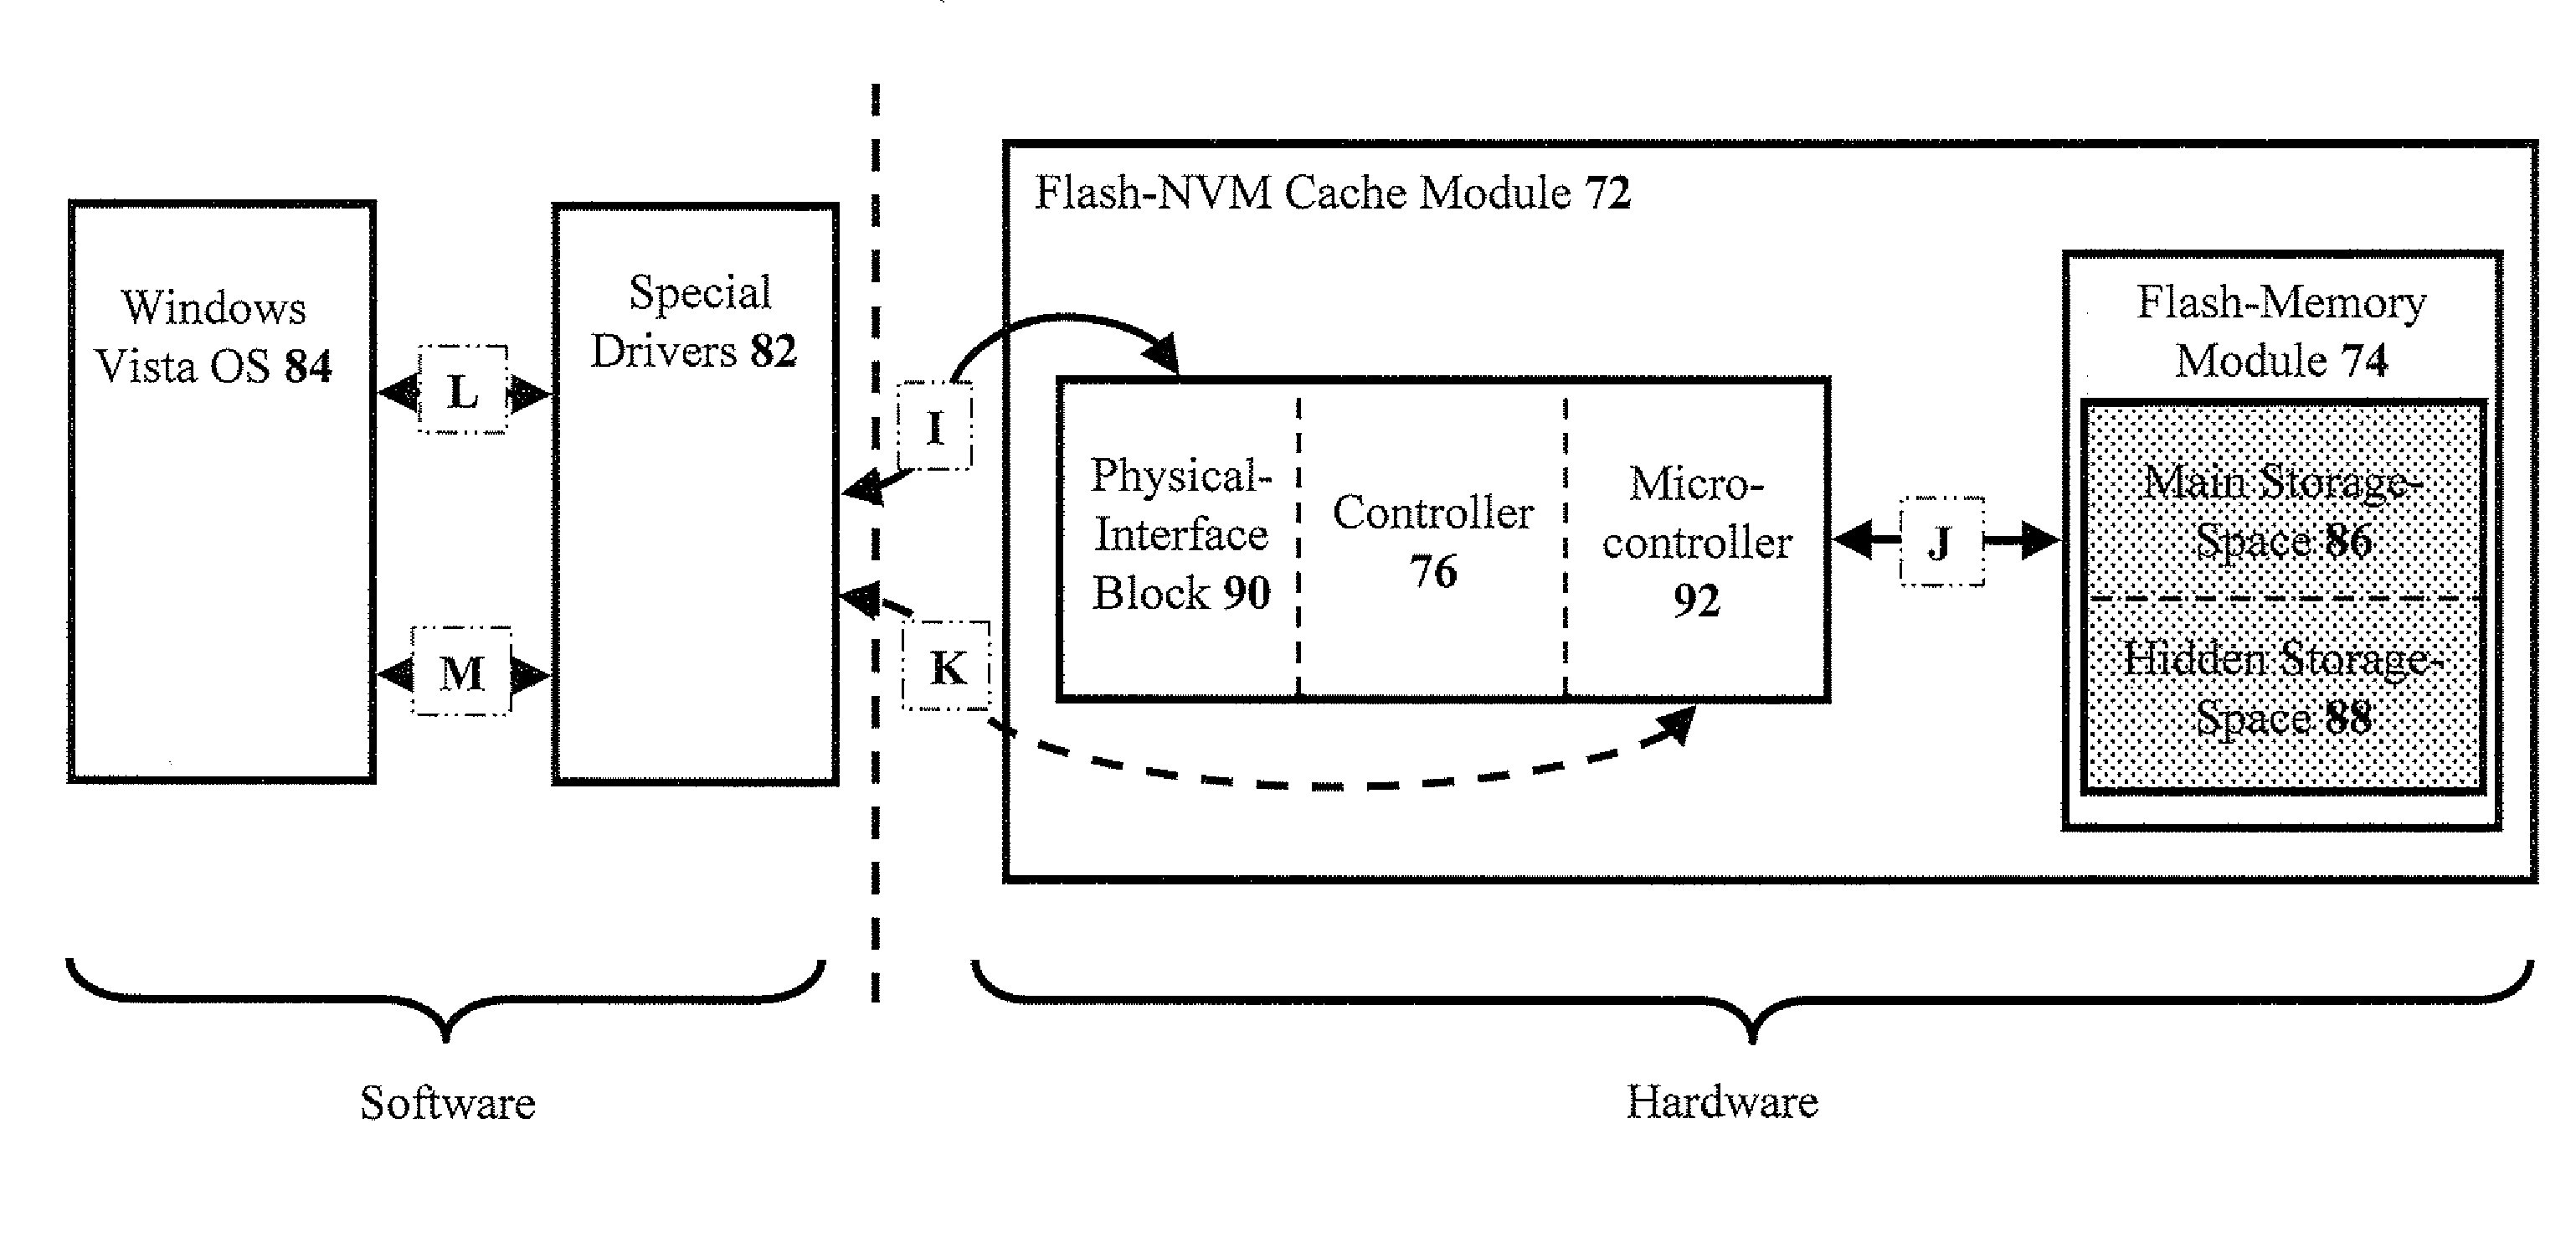 Systems For Supporting Readydrive And Readyboost Accelerators In A Single Flash-Memory Storage Device